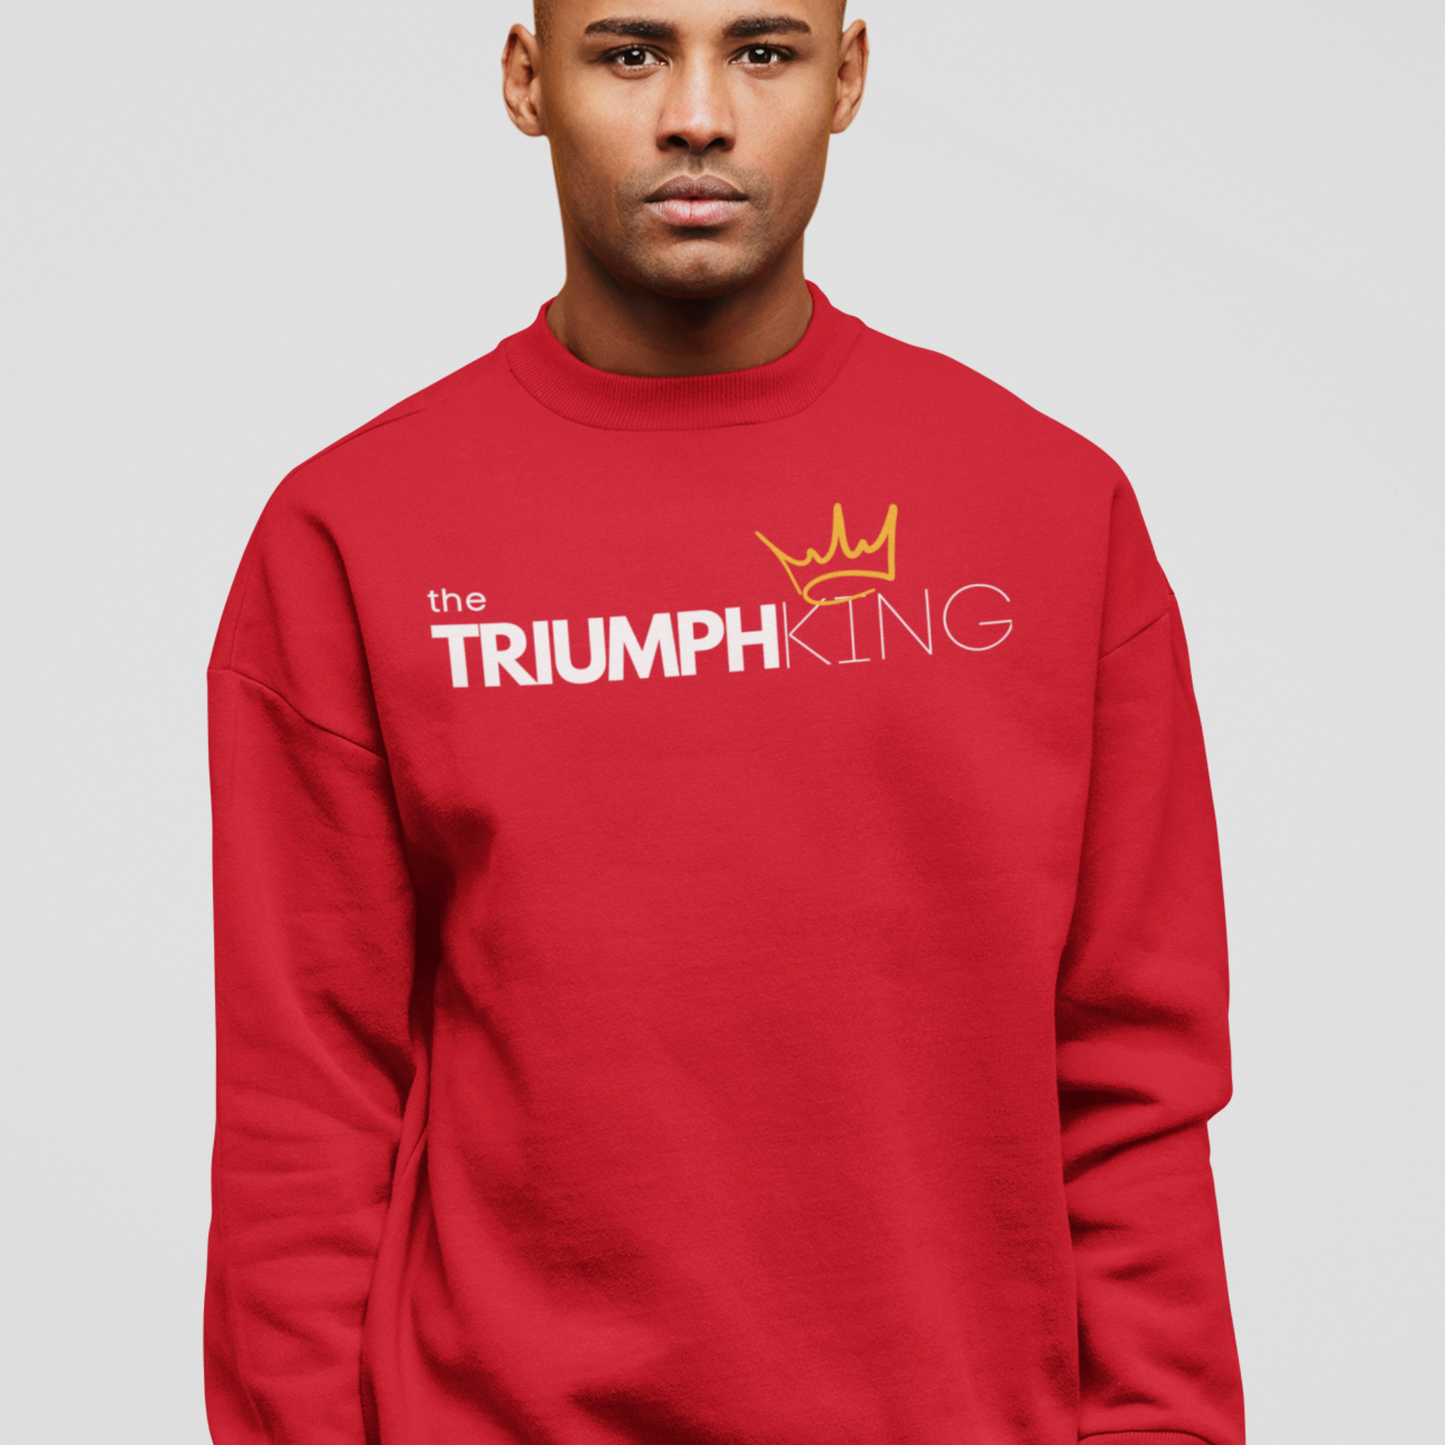 Shop our Triumph King red sweatshirt. This cozy faith based apparel is for Christian men who know they're more than conquerors with Christ. Enjoy this soft and comfy sweatshirt everyday.